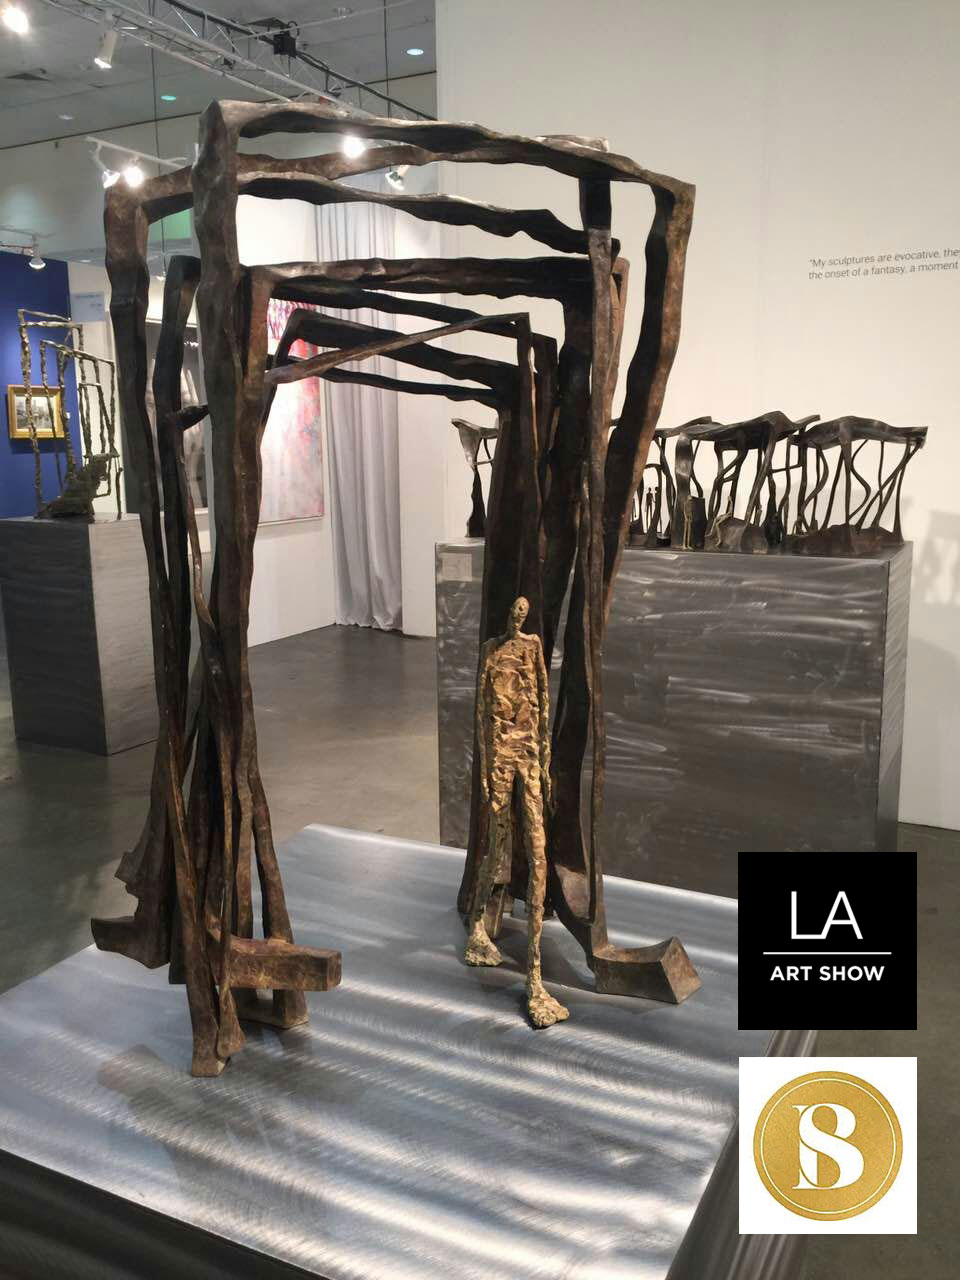 French sculptor Val - Valérie Goutard - with Simard-Bilodeau Contemporary at LA Art Show with Sculptureval with Le passage